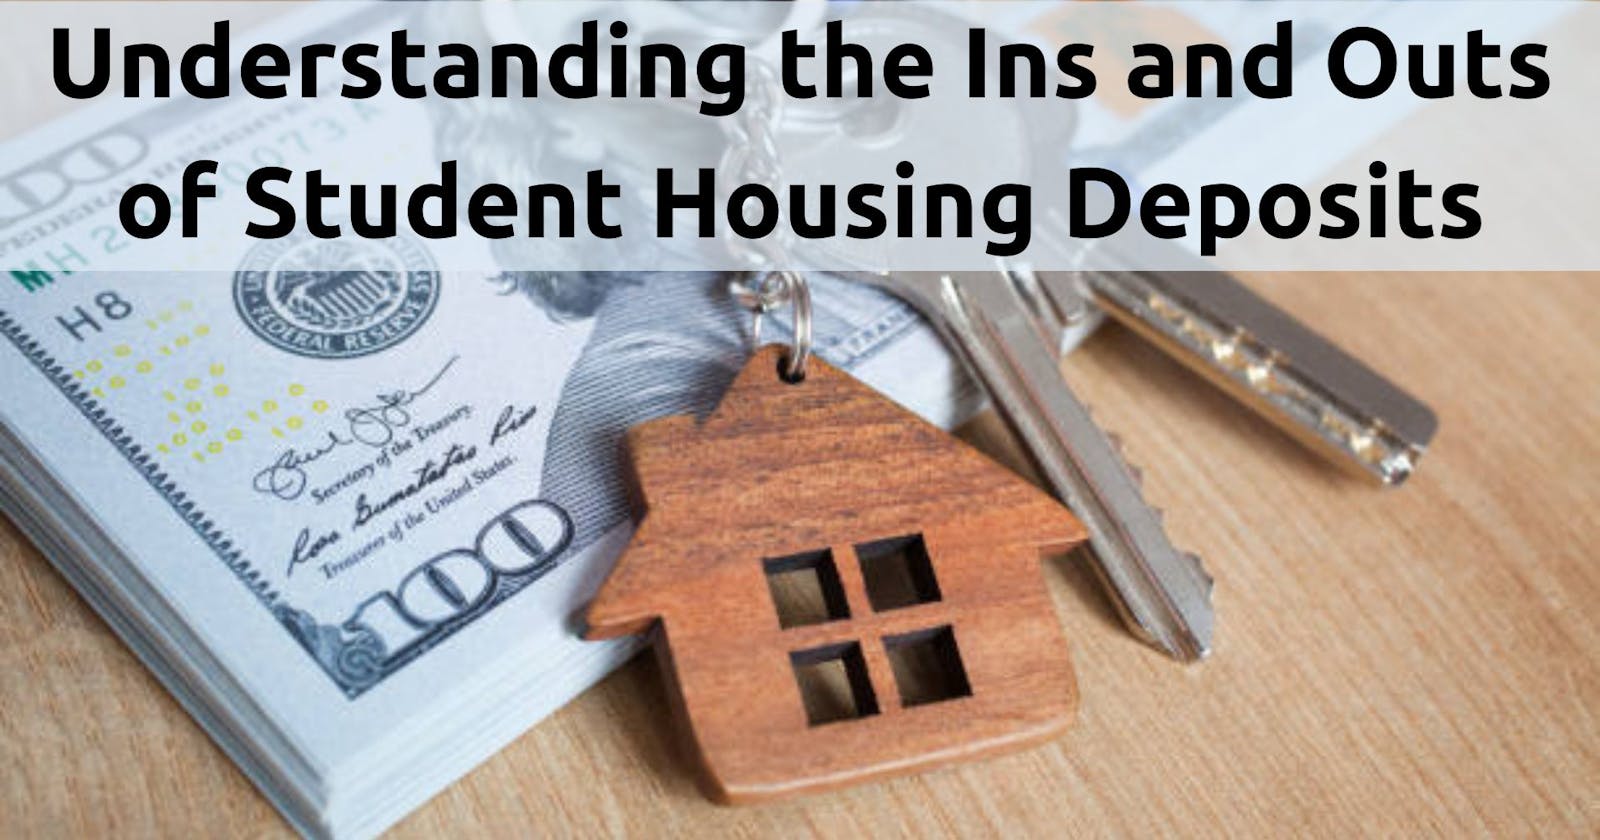 Understanding the Ins and Outs of Student Housing Deposits